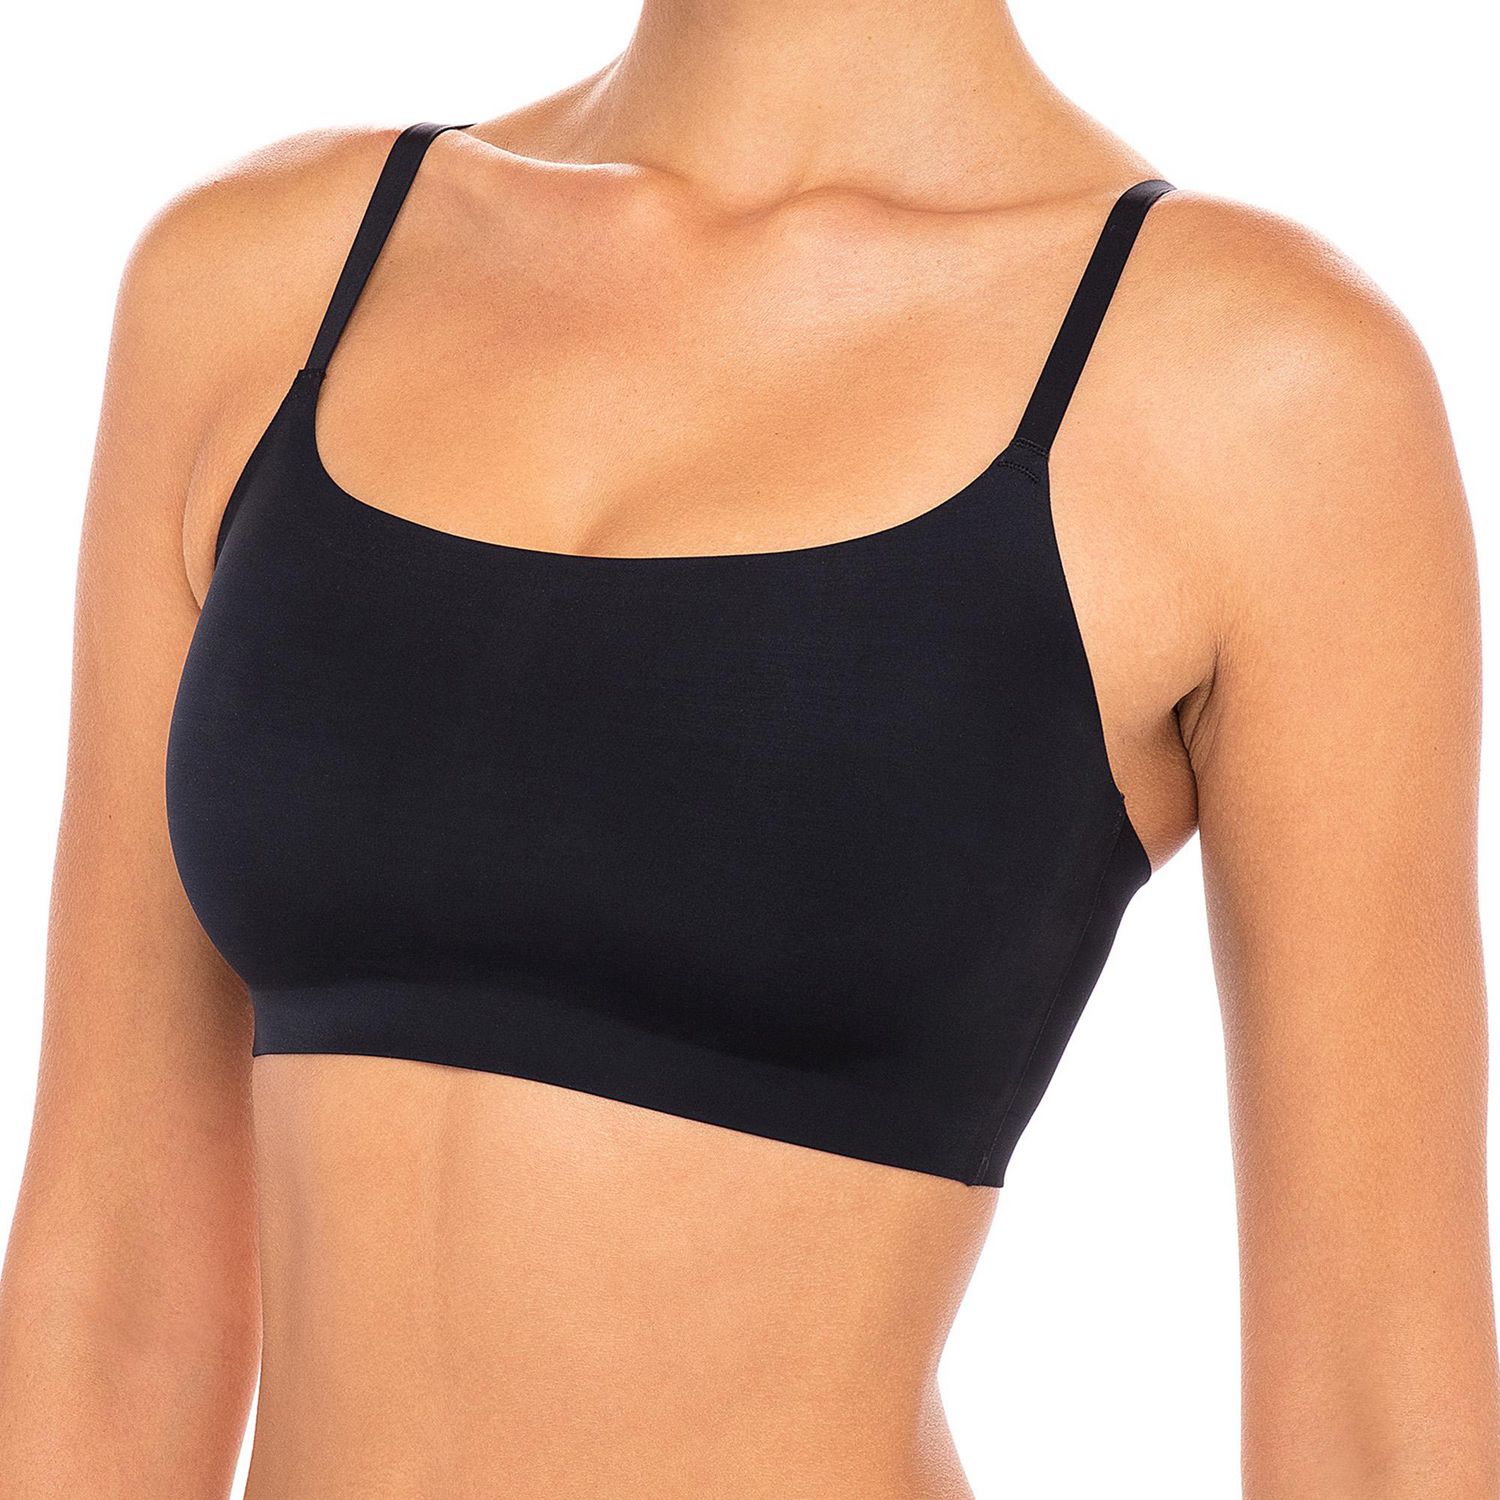 Buy Leading Lady black colored solid cotton bra Online at Low